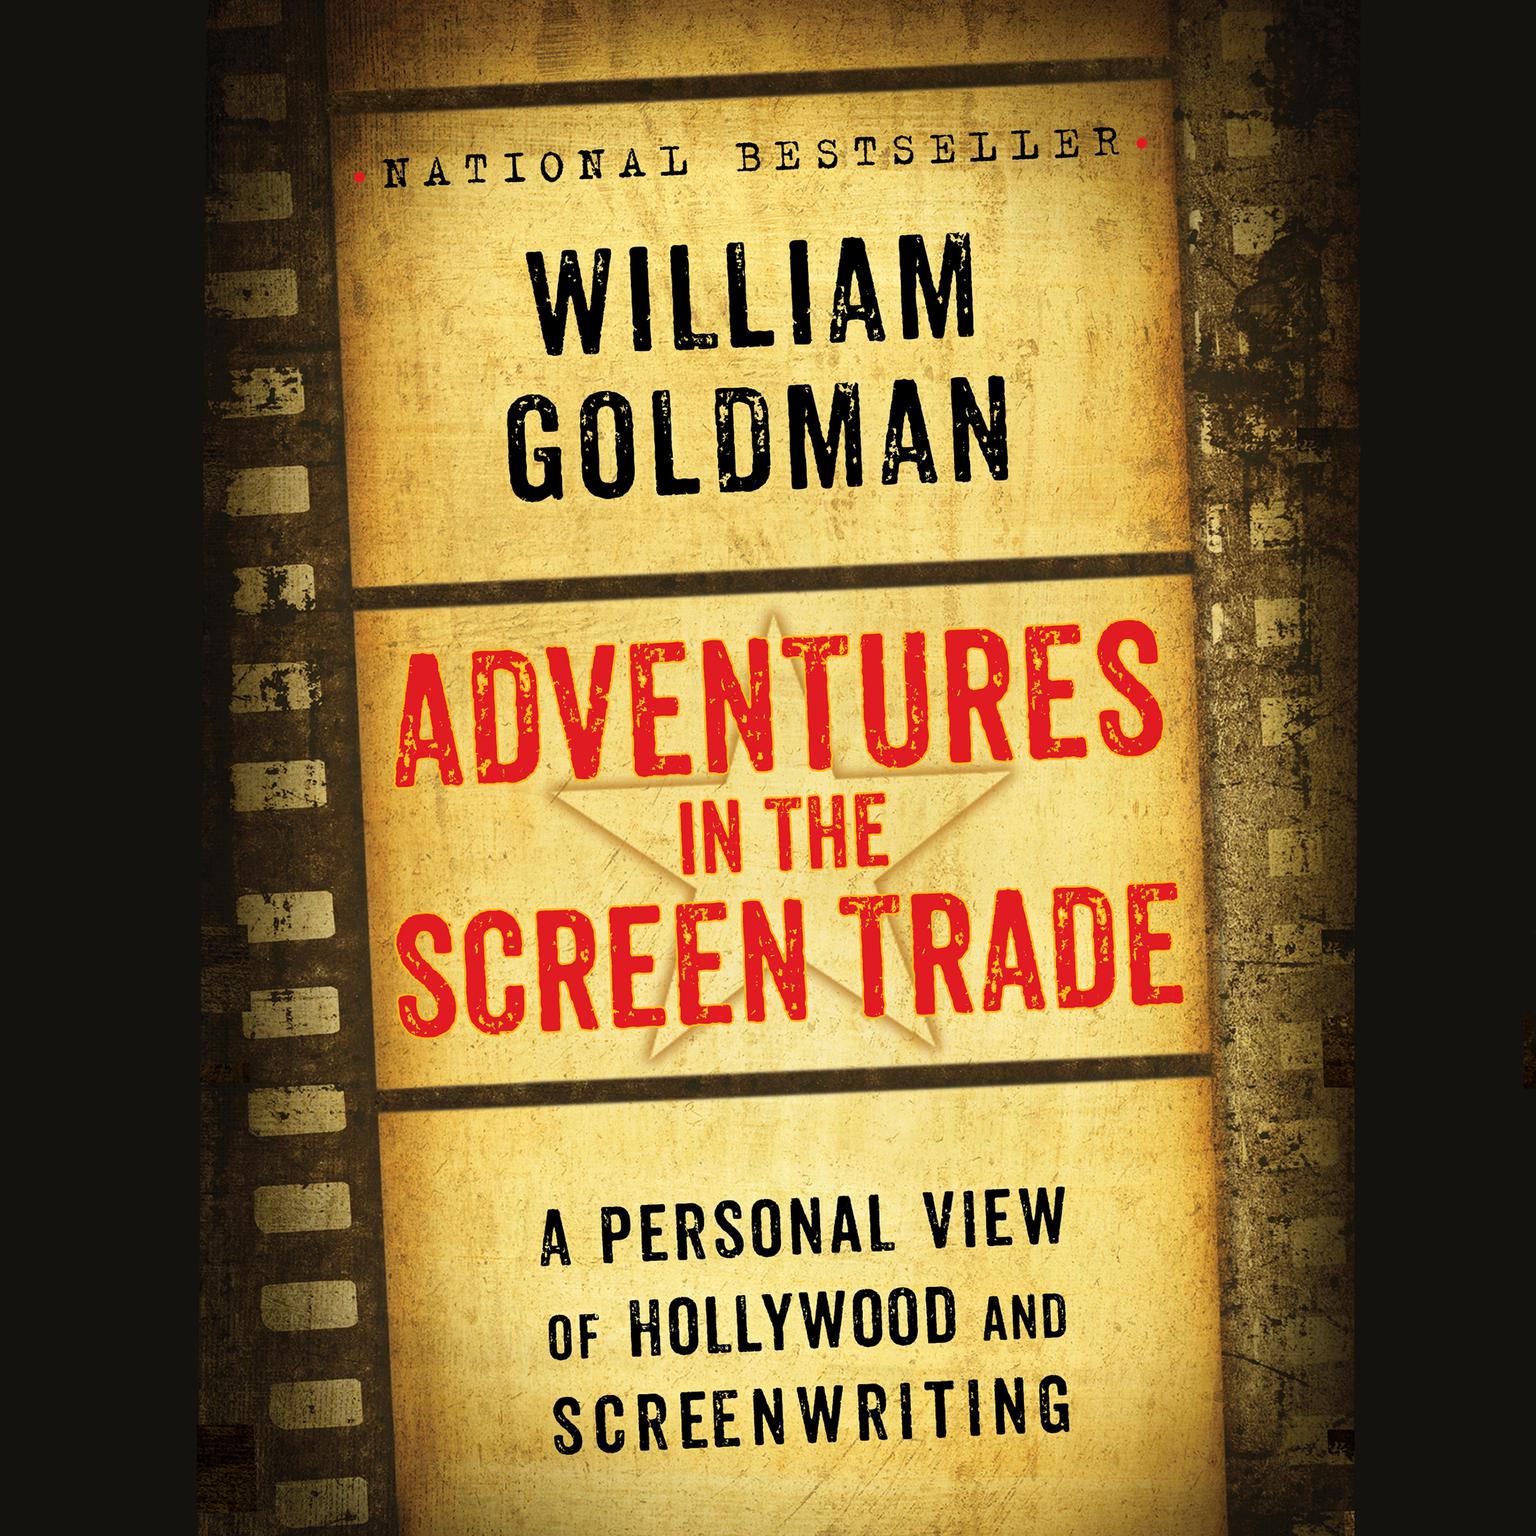 Adventures in the Screen Trade: A Personal View of Hollywood and Screenwriting Audiobook, by William Goldman